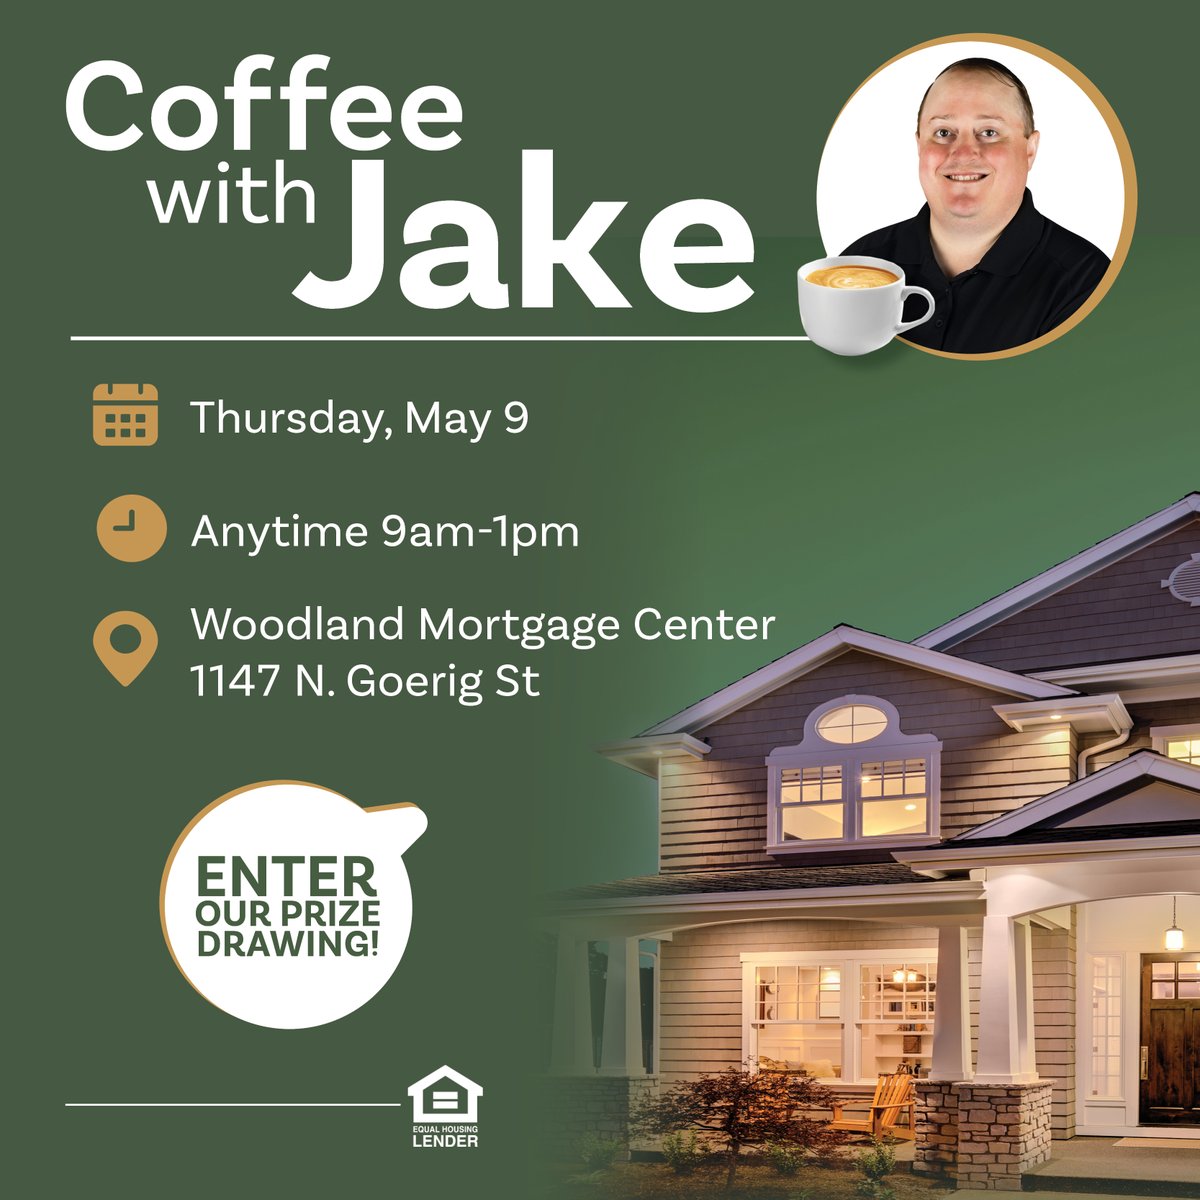 Have mortgage questions? Let's chat about it over muffins and coffee! Visit mortgage expert Jake anytime 9am-1pm today, and he'll help you get the answers you need to feel confident in your home buying journey! 🏠☕#CoffeewithJake